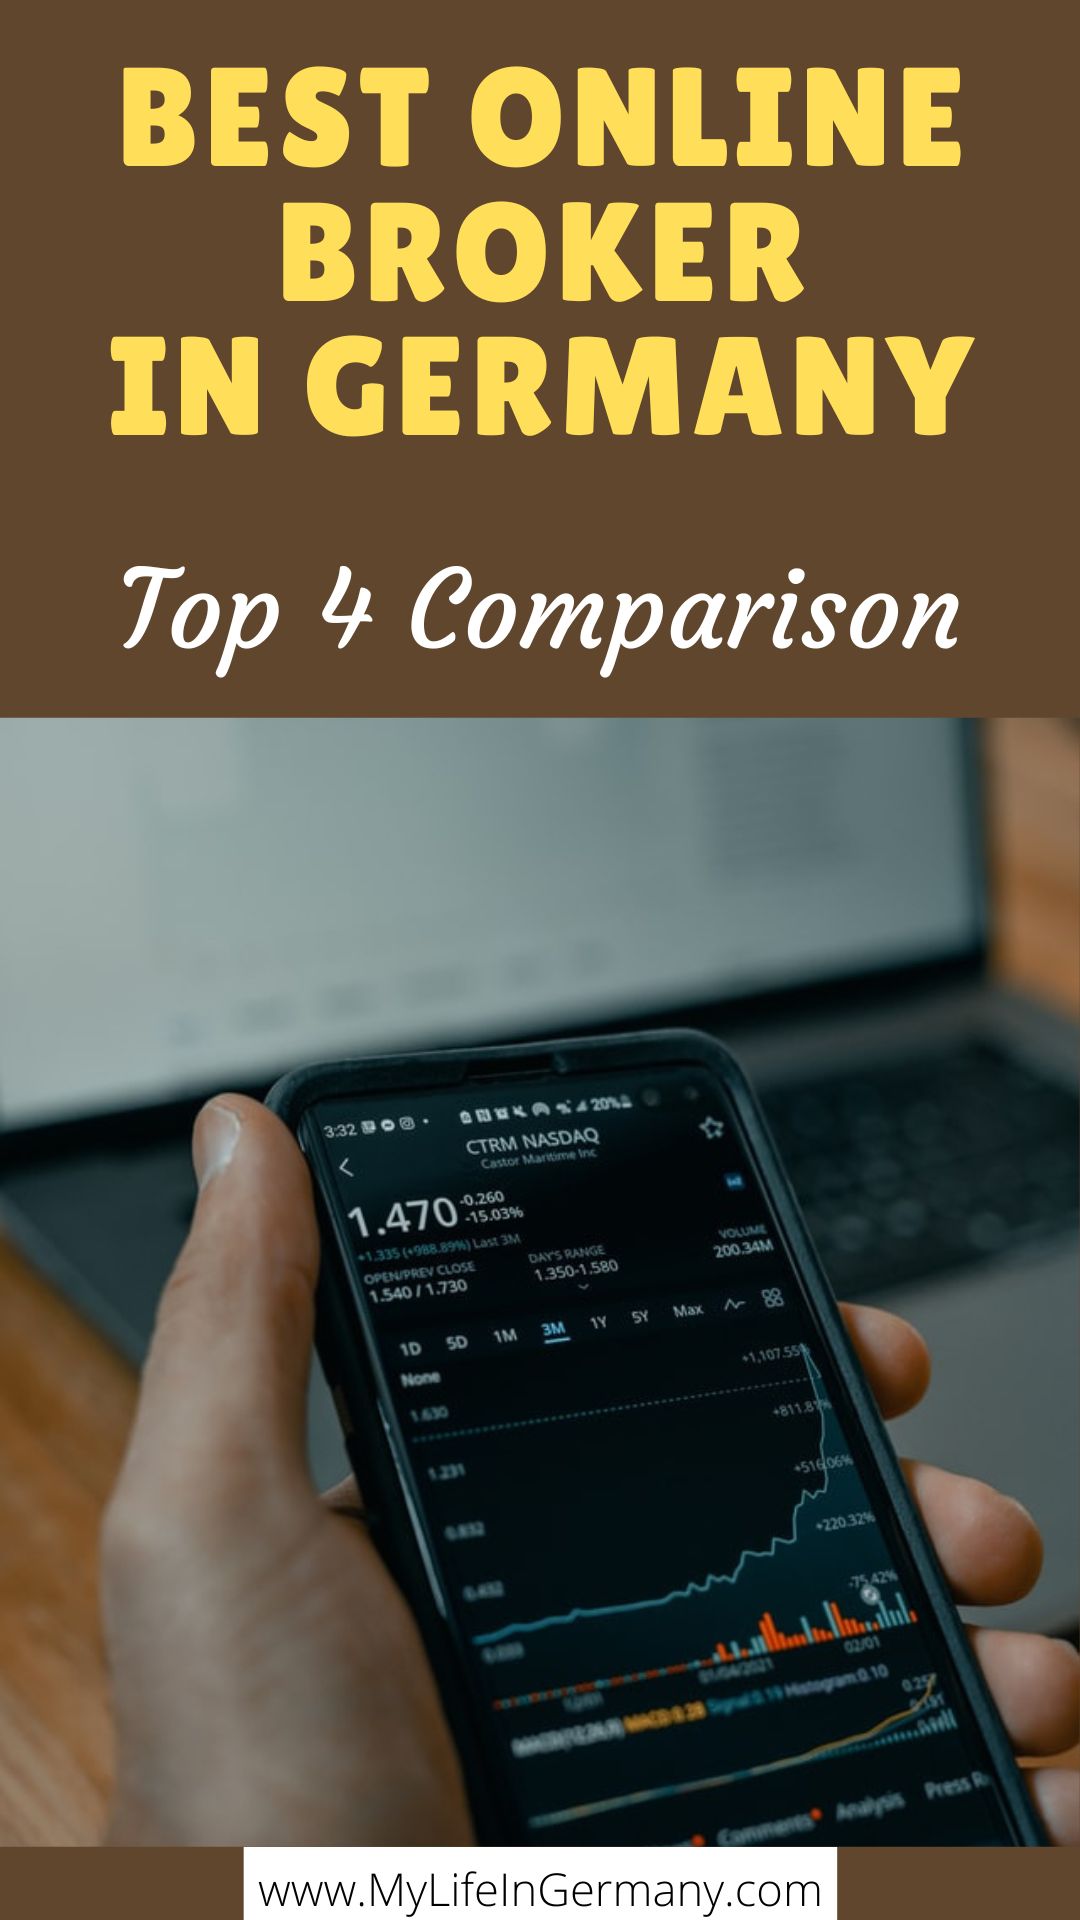 pinterest edited_4 best online broker germany_top 5 comparison_my life in germany_hkwomanabroad